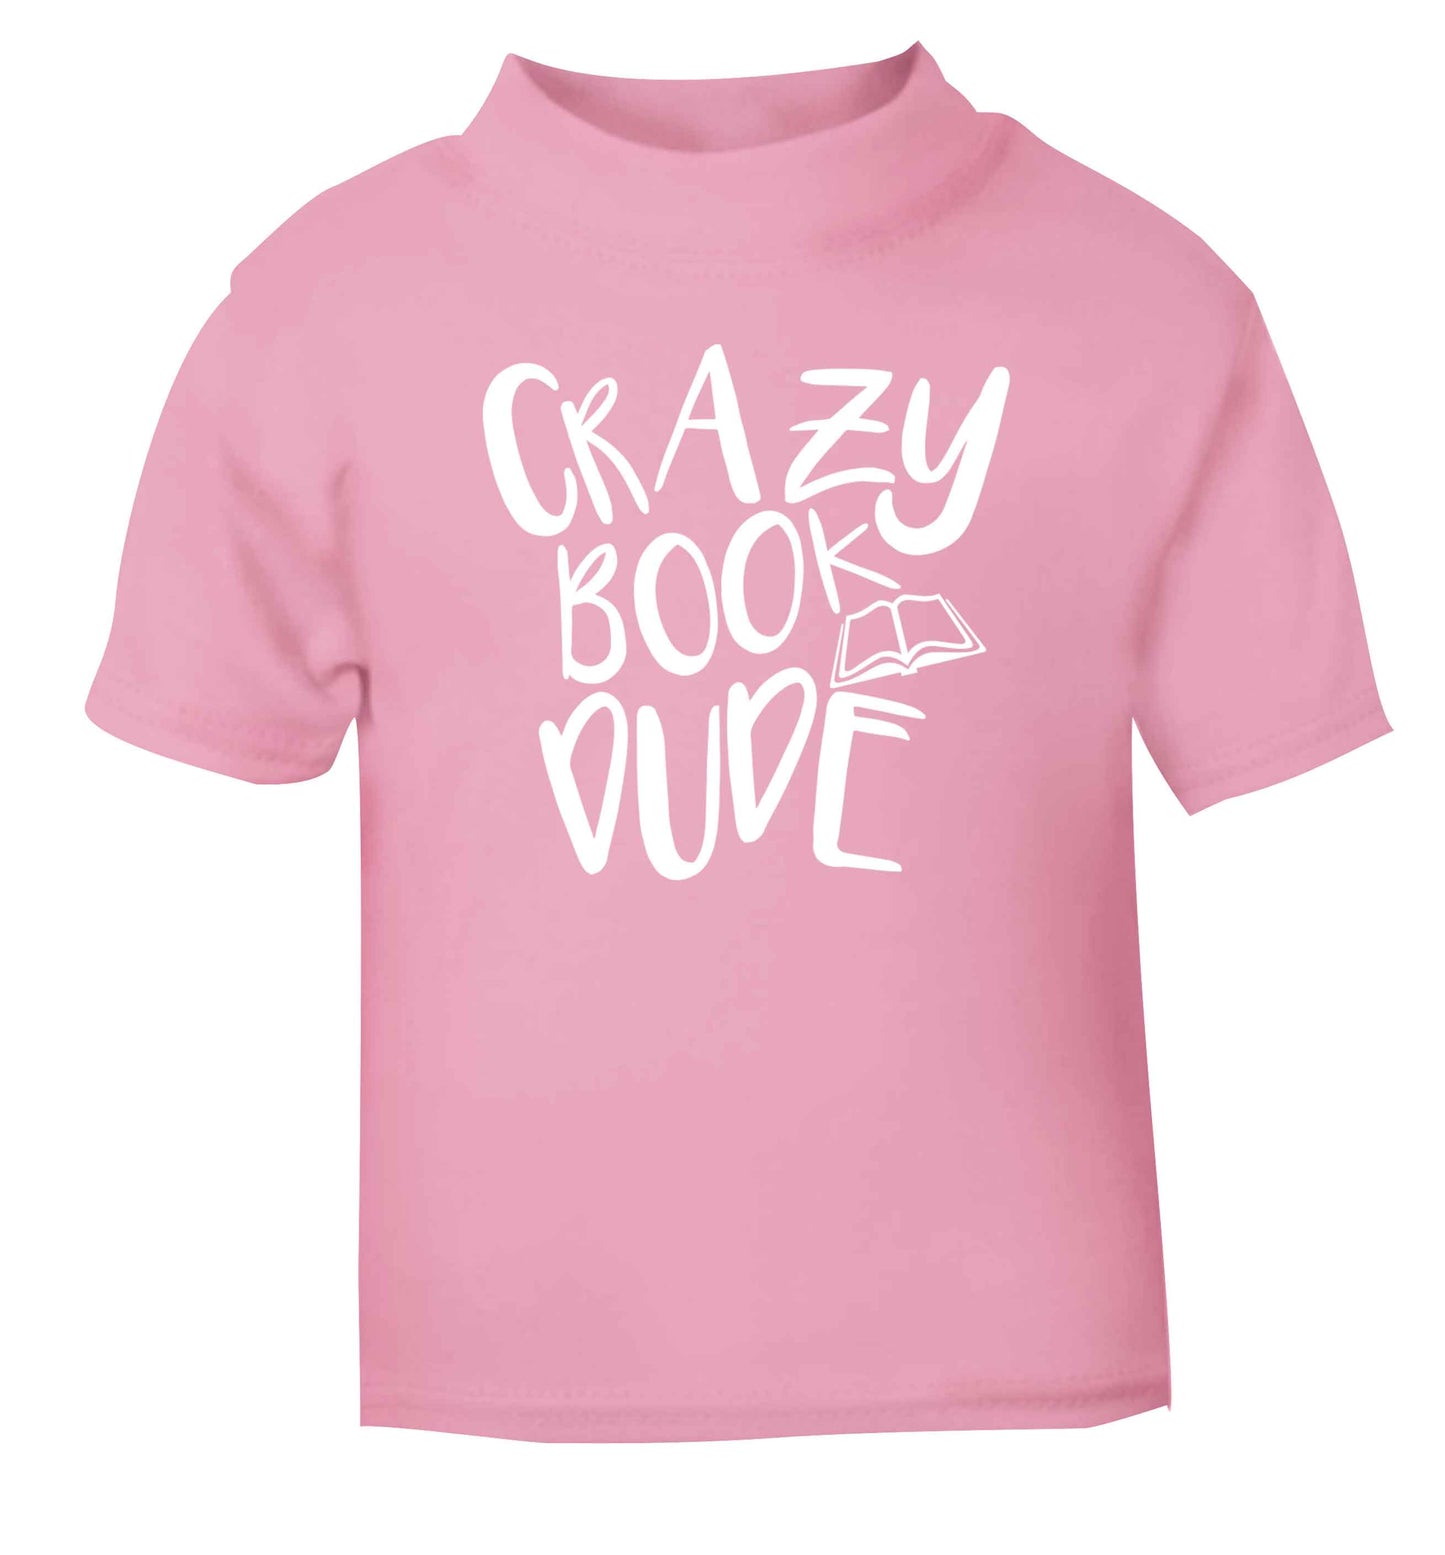 Crazy book dude light pink Baby Toddler Tshirt 2 Years